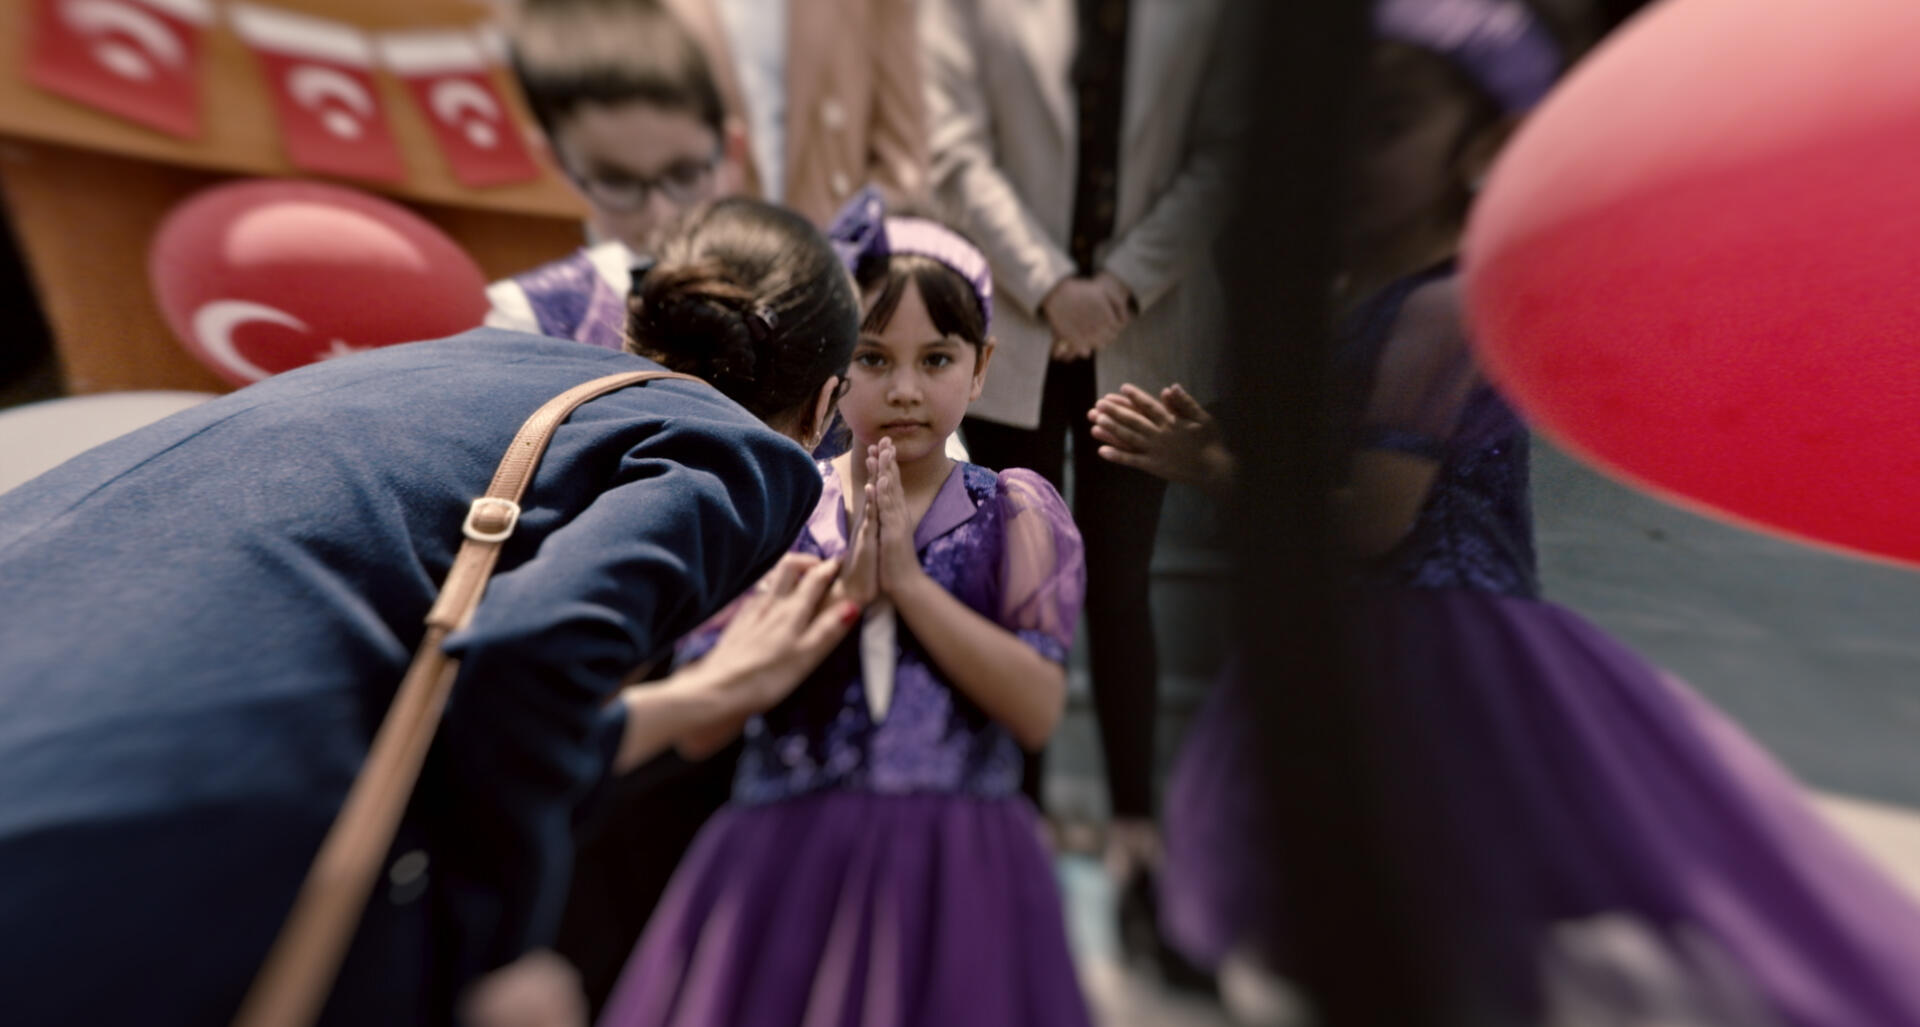 A little girl in a purple dress stands next to a woman and puts her palms together. The perspective of the picture is distorted.